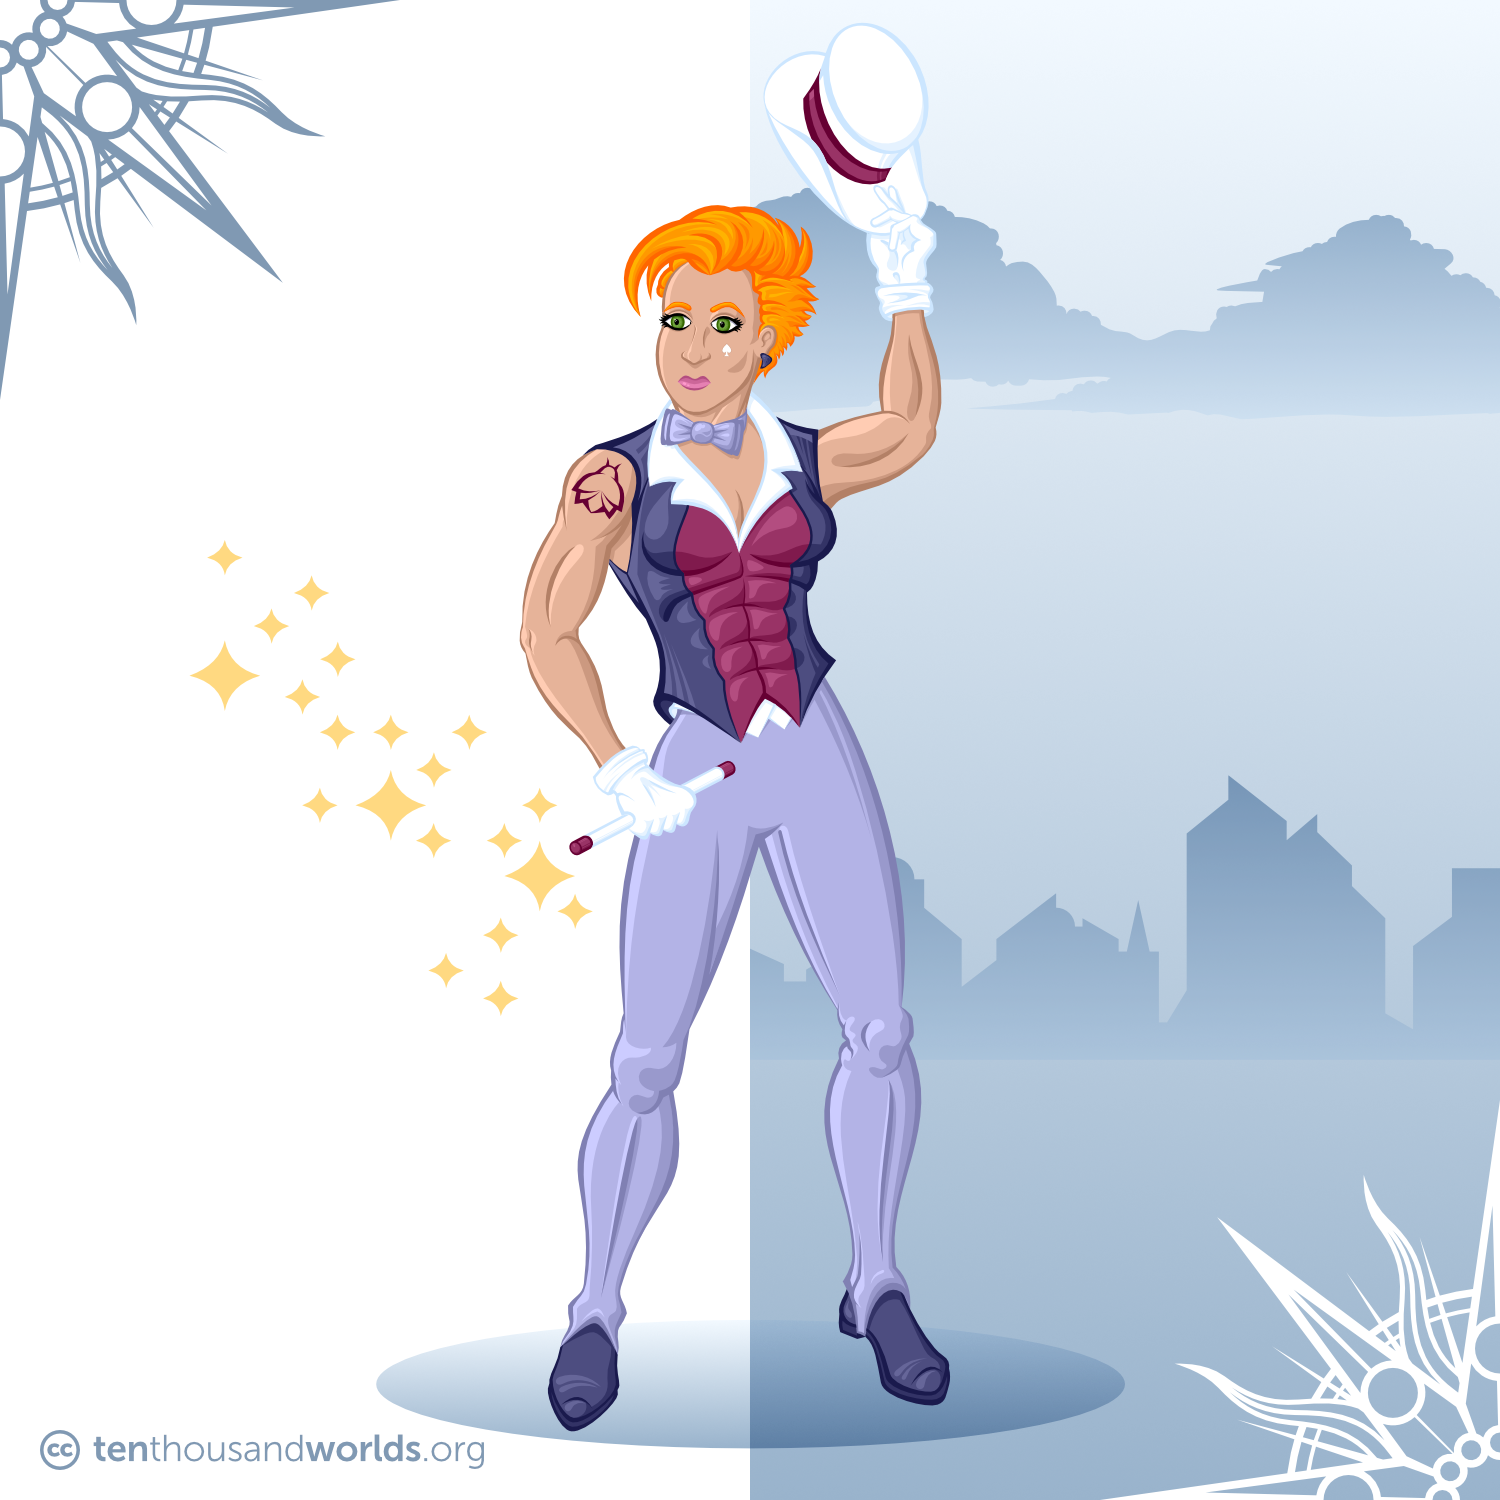 A woman with an asymmetrical orange hairstyle wearing an updated stage magician’s costume in violets and reds. She holds a white wand in one hand and raises her white top hat with the other. There’s a silvery-white spade painted on her cheek, and one shoulder bears an abstract red tattoo.